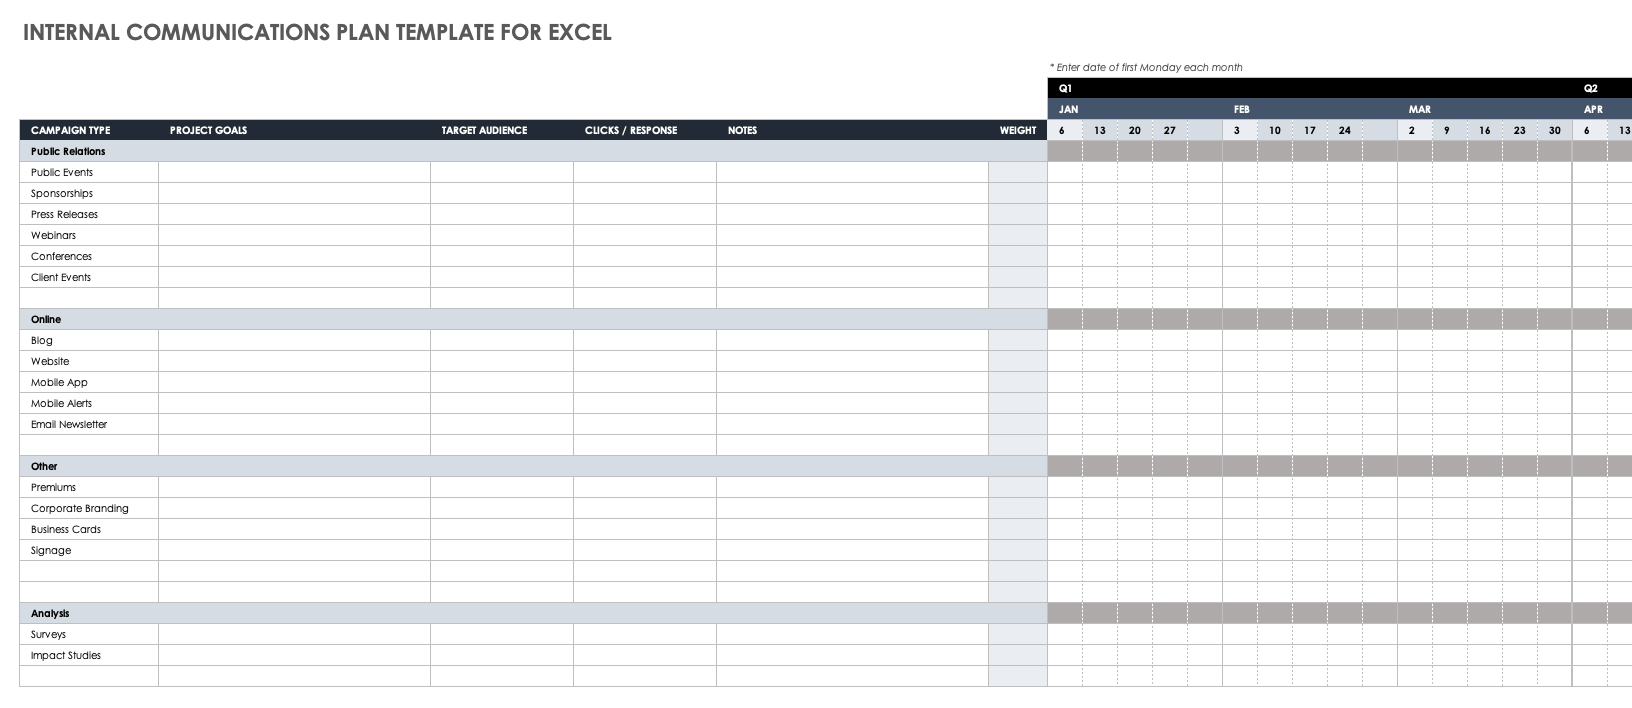 Internal Communications Plan Template for Excel